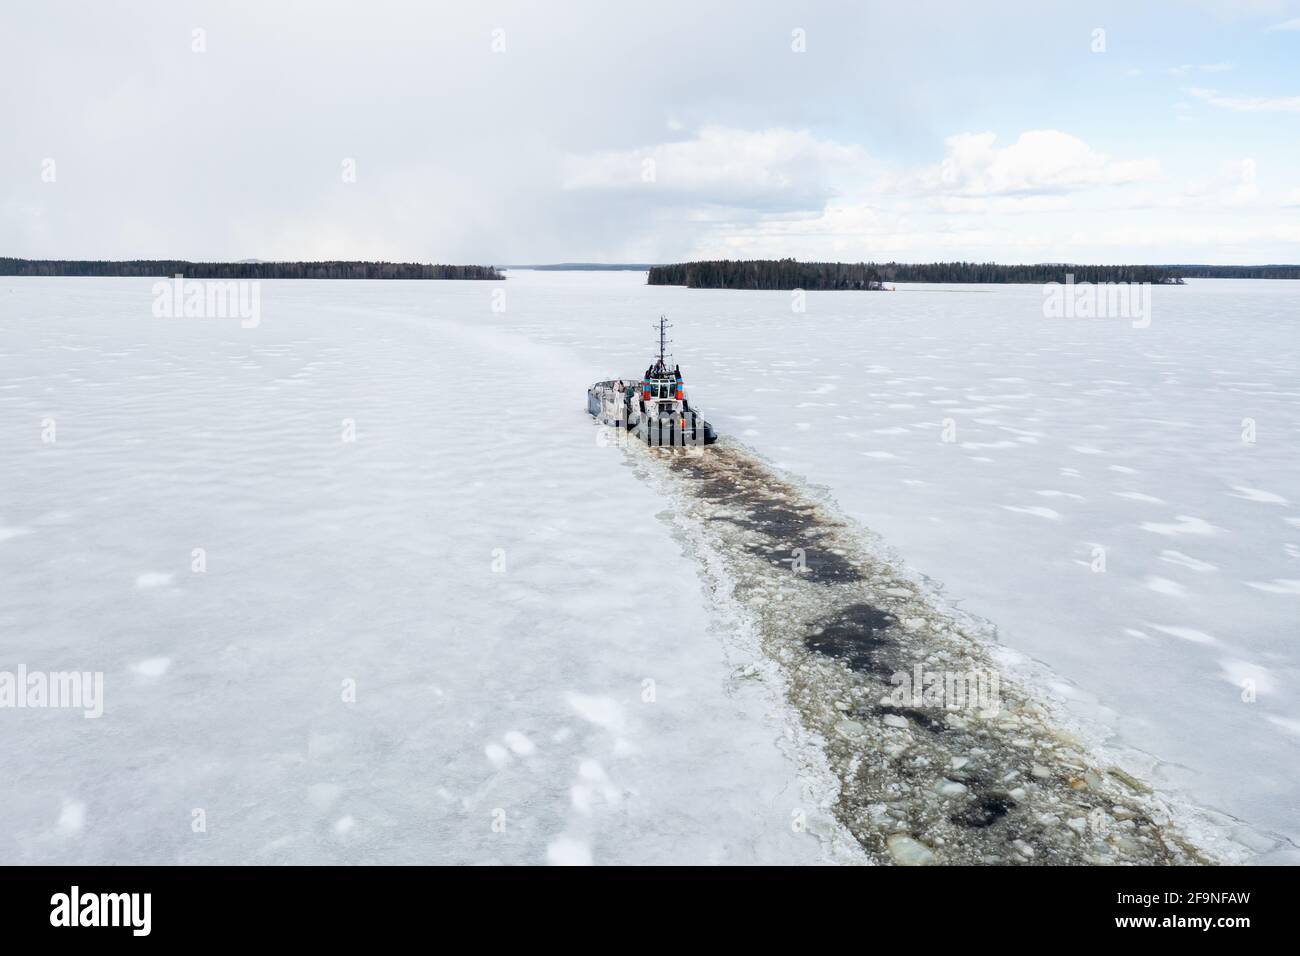 The icebreaker opens a shipping lane on an icy lake in Eastern Finland Stock Photo